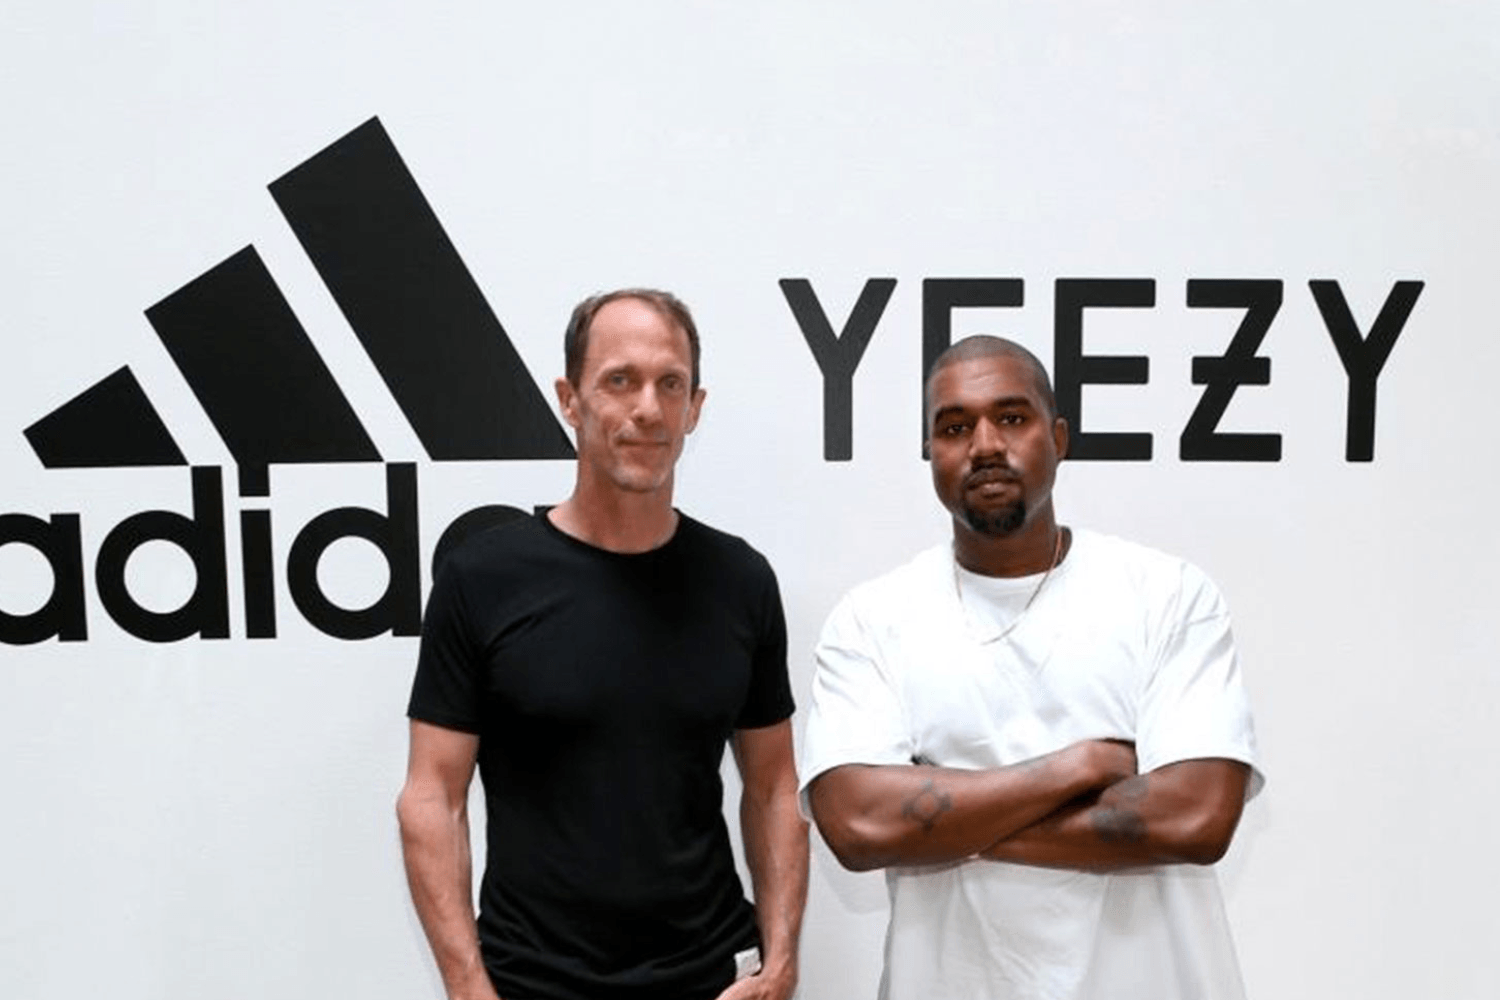 adidas continues Yeezy line without Kanye West